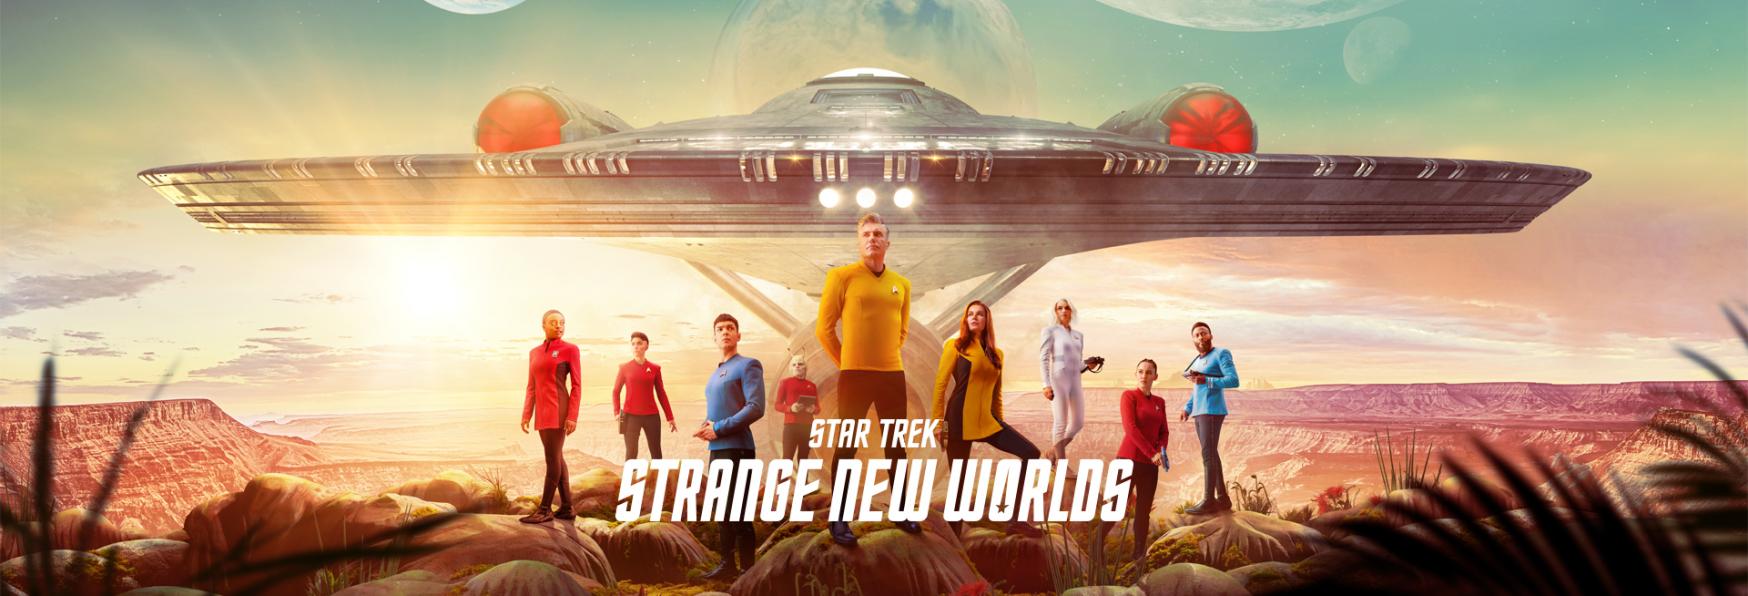 Star Trek: Strange New Worlds 3 will be there!  Paramount+ renews the TV Series and unveils the Release Date of the 2nd